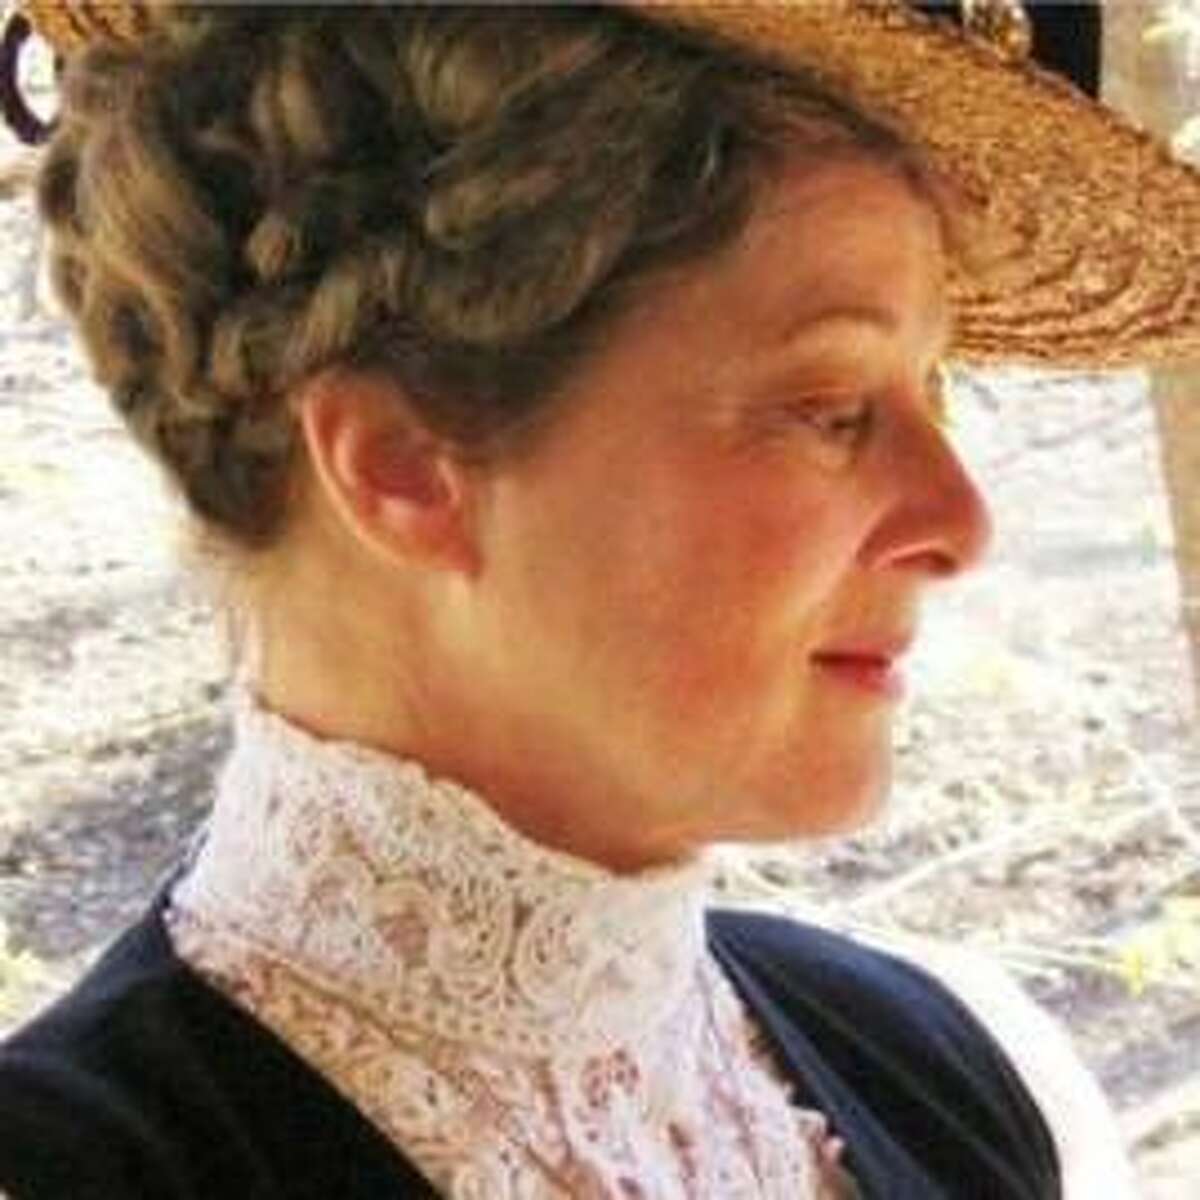 Carrie Chapman Catt (Suffragist and founder of League of Women Voters) will be played by American Theater Guild’s Historical Interpreter Pat Jordan.